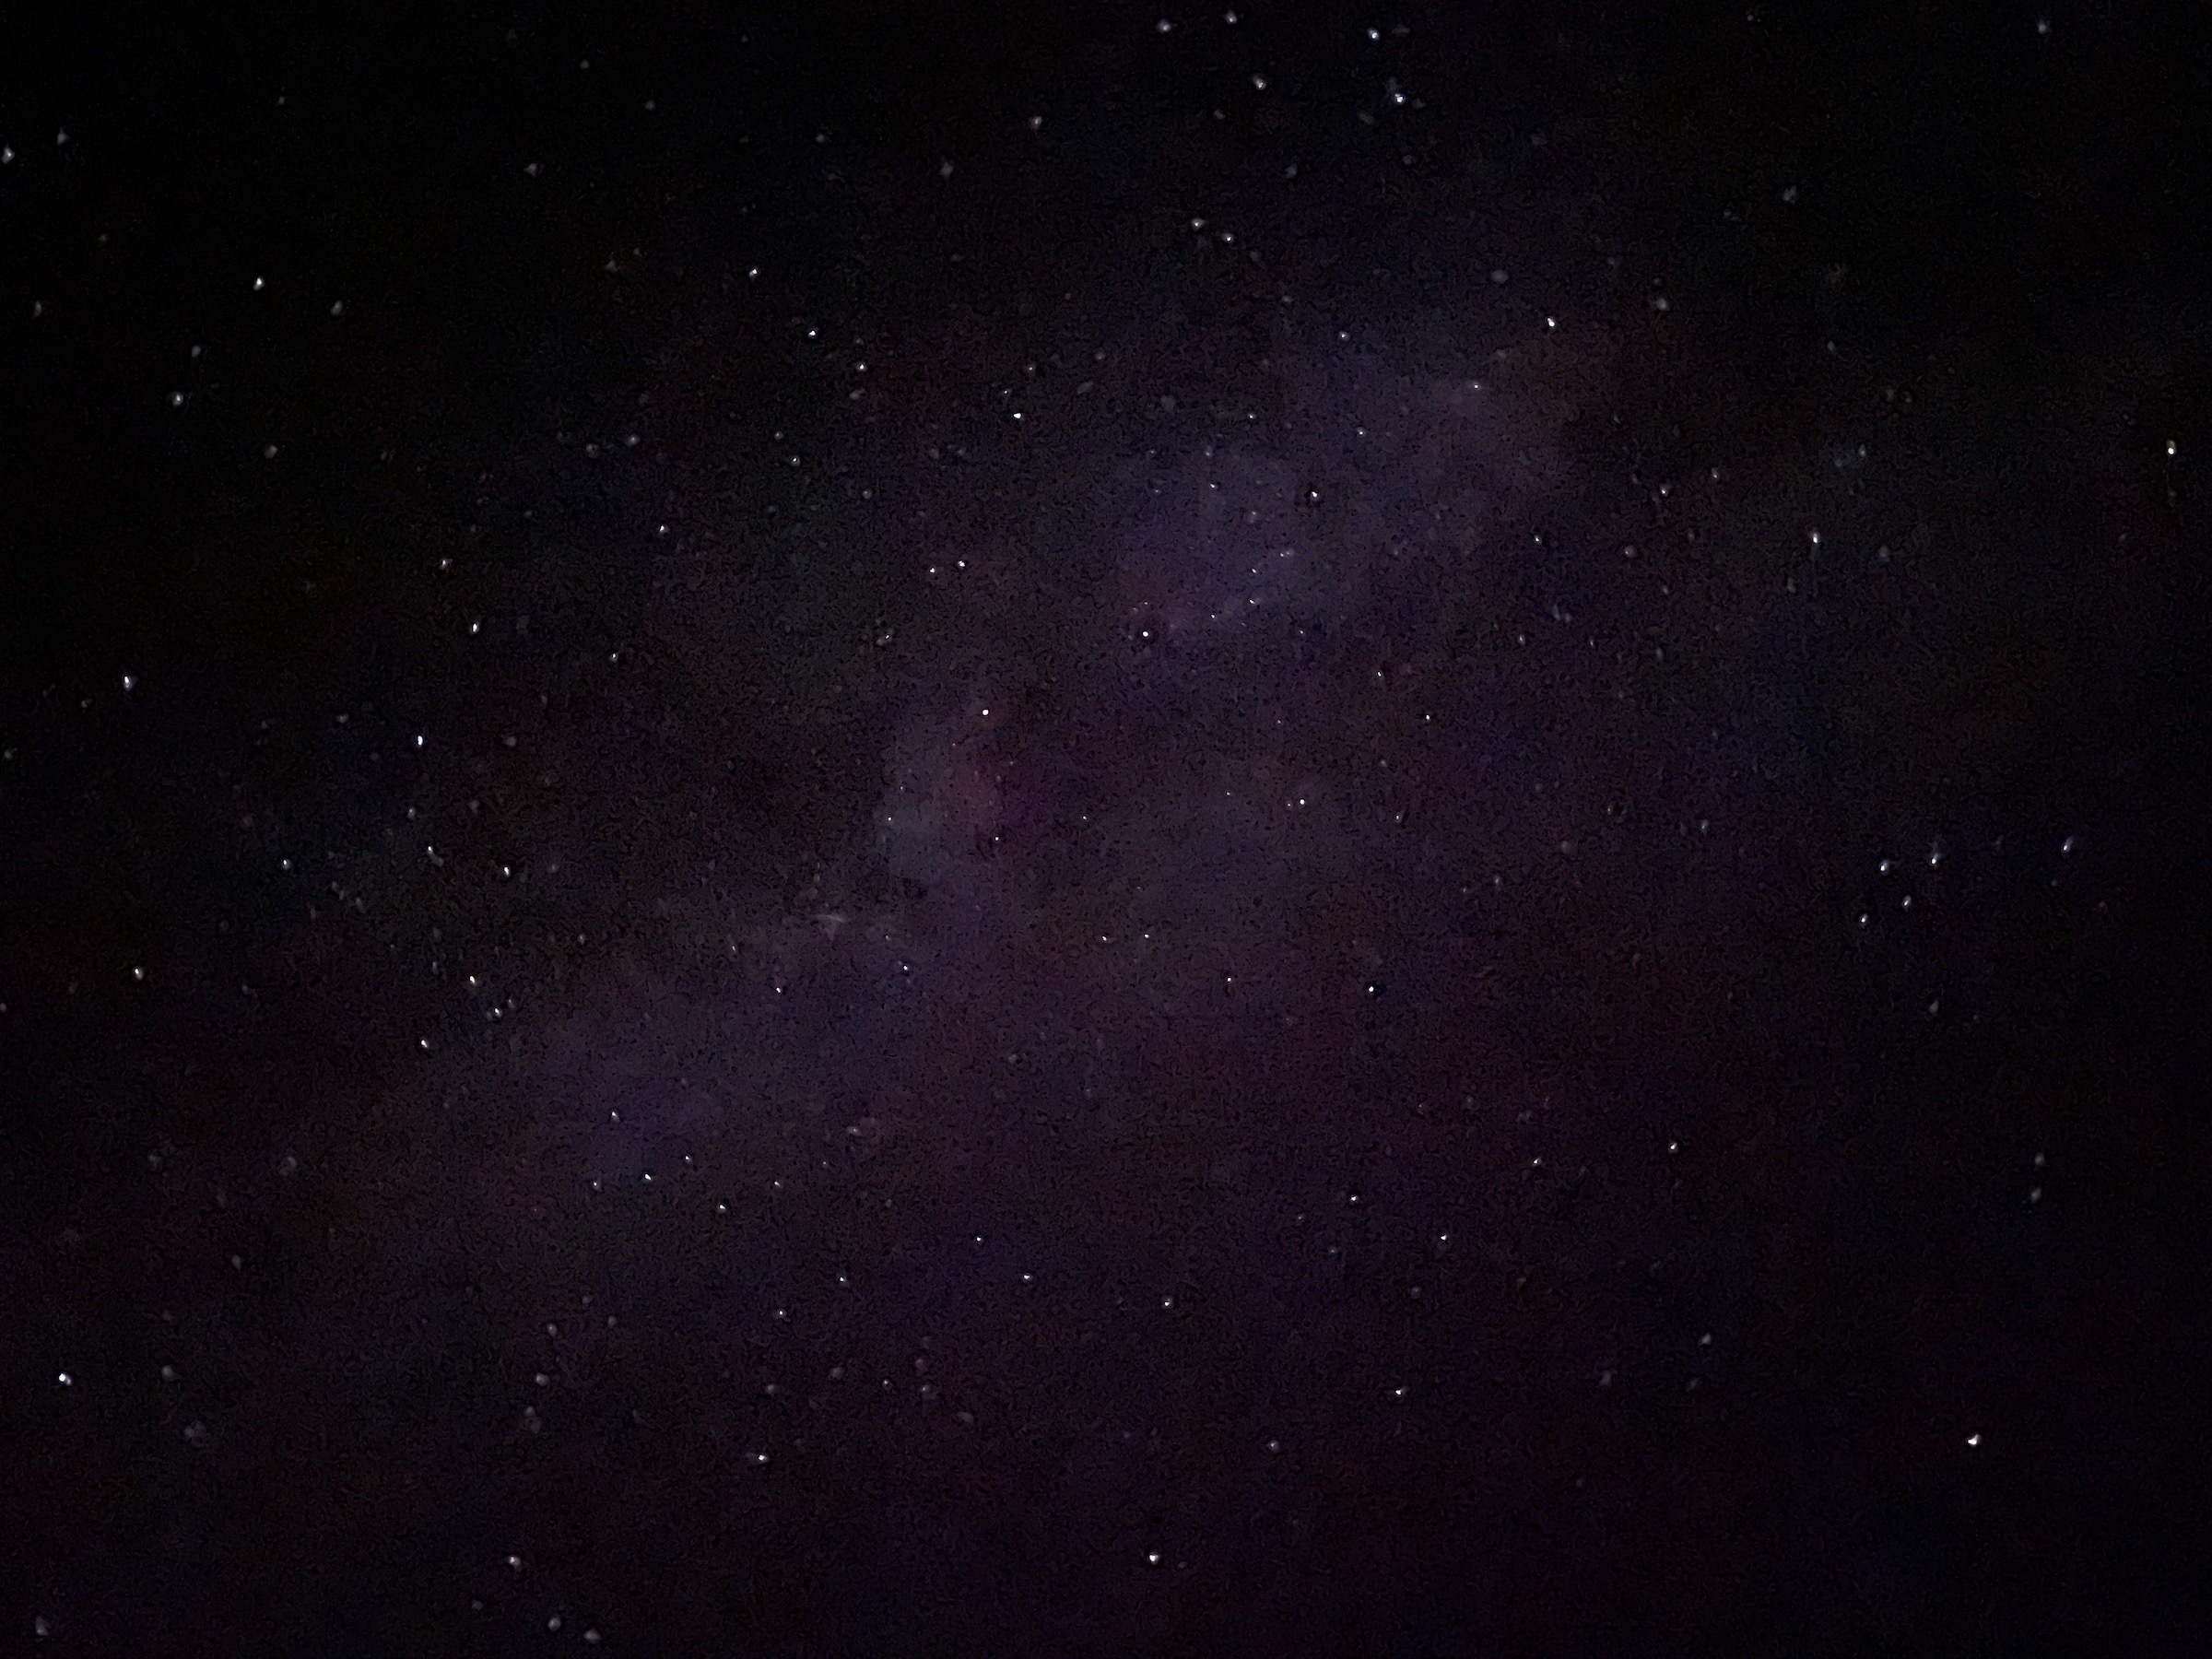 Stars and Milky Way from My Phone - Stargazing at the Bryce Canyon